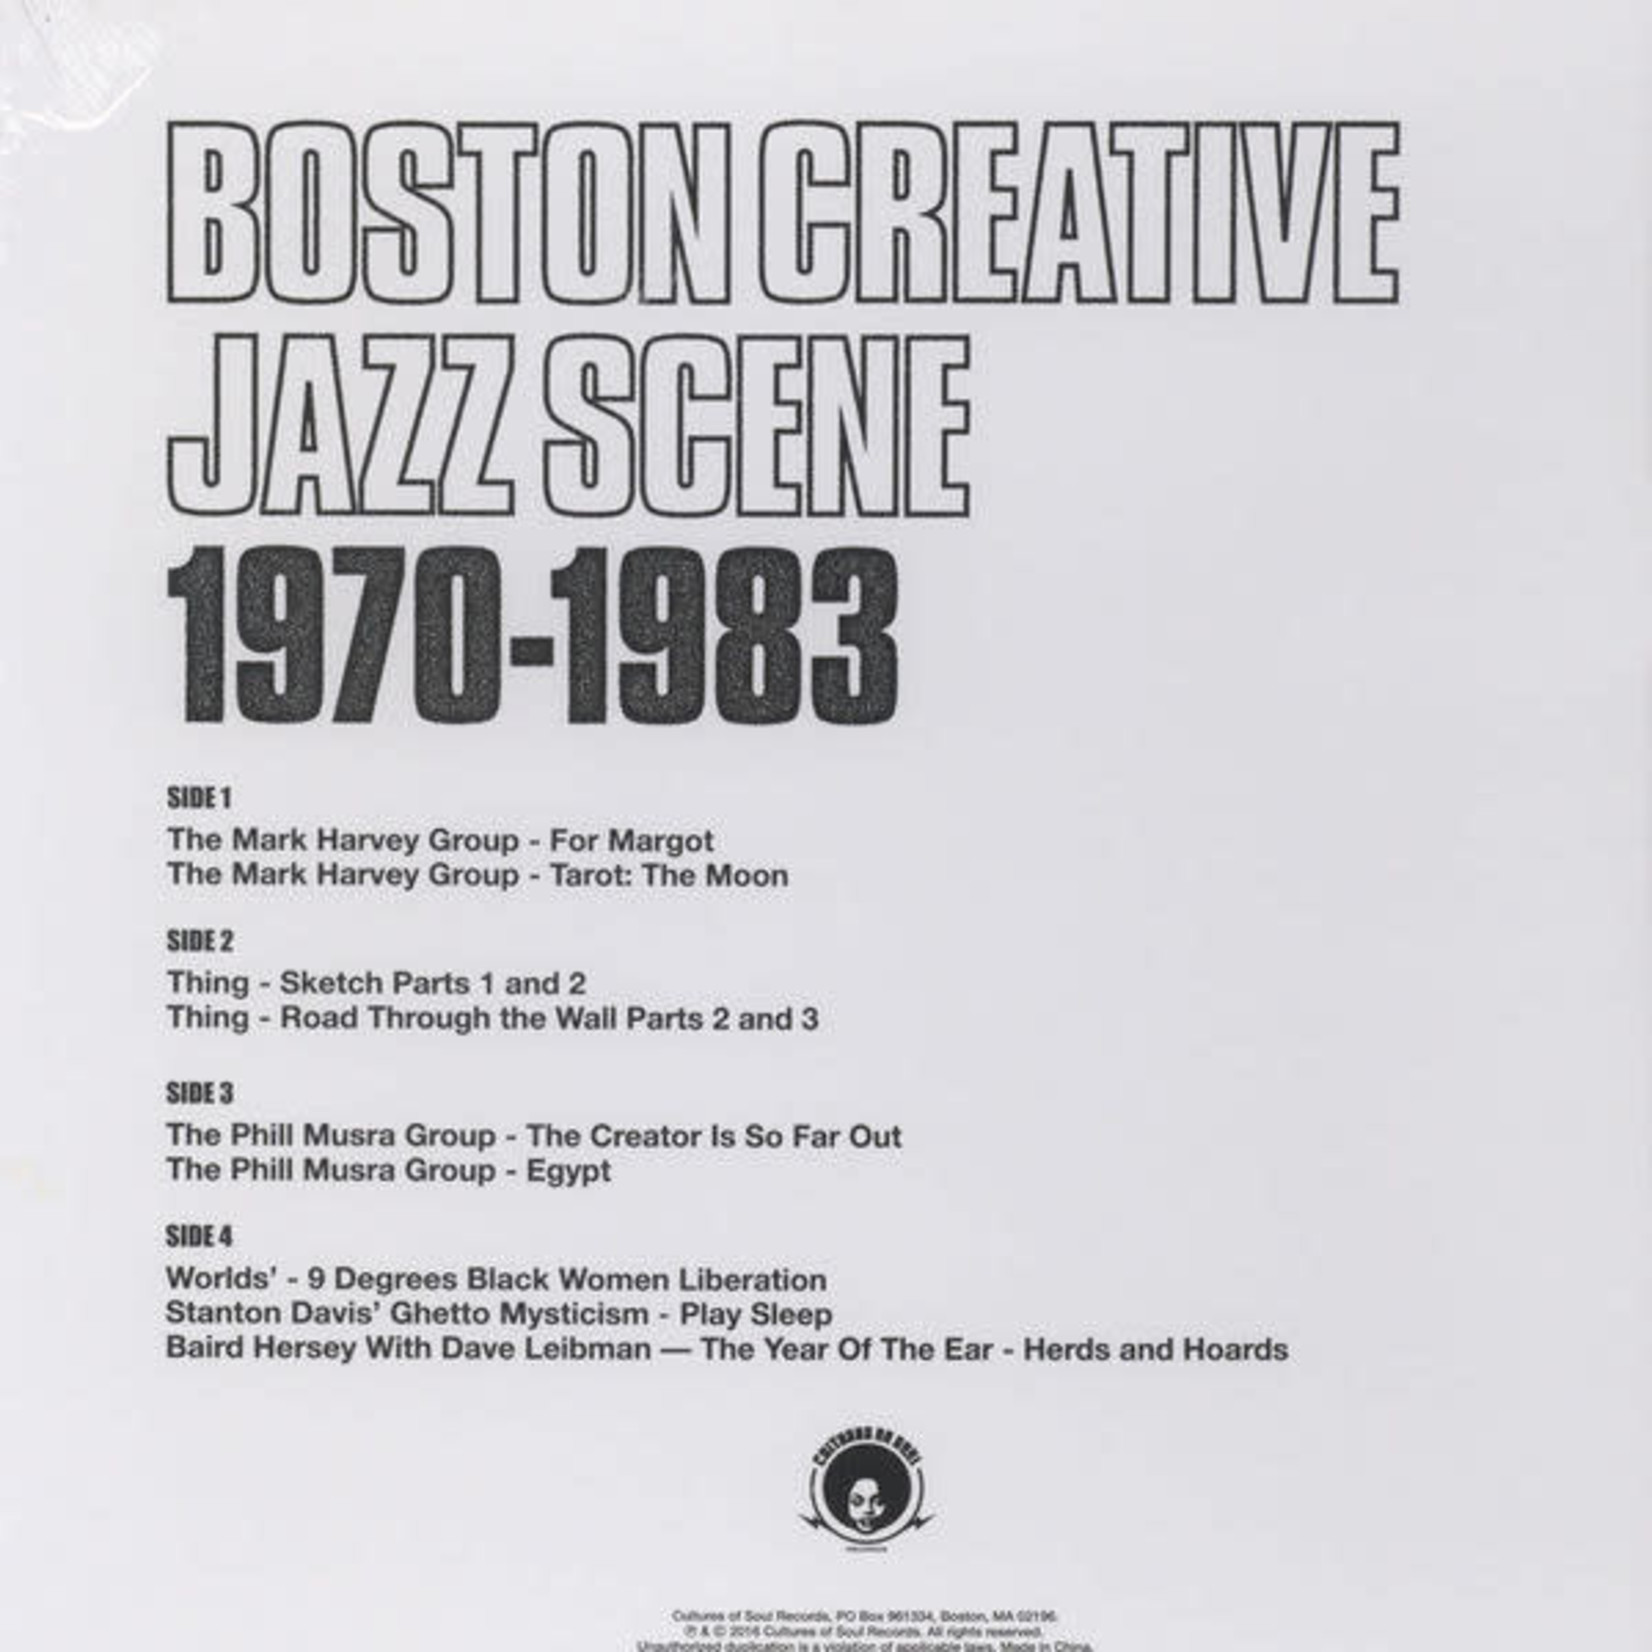 Cultures of Soul V/A - The Boston Creative Jazz Scene: 1970-1983 (2LP)